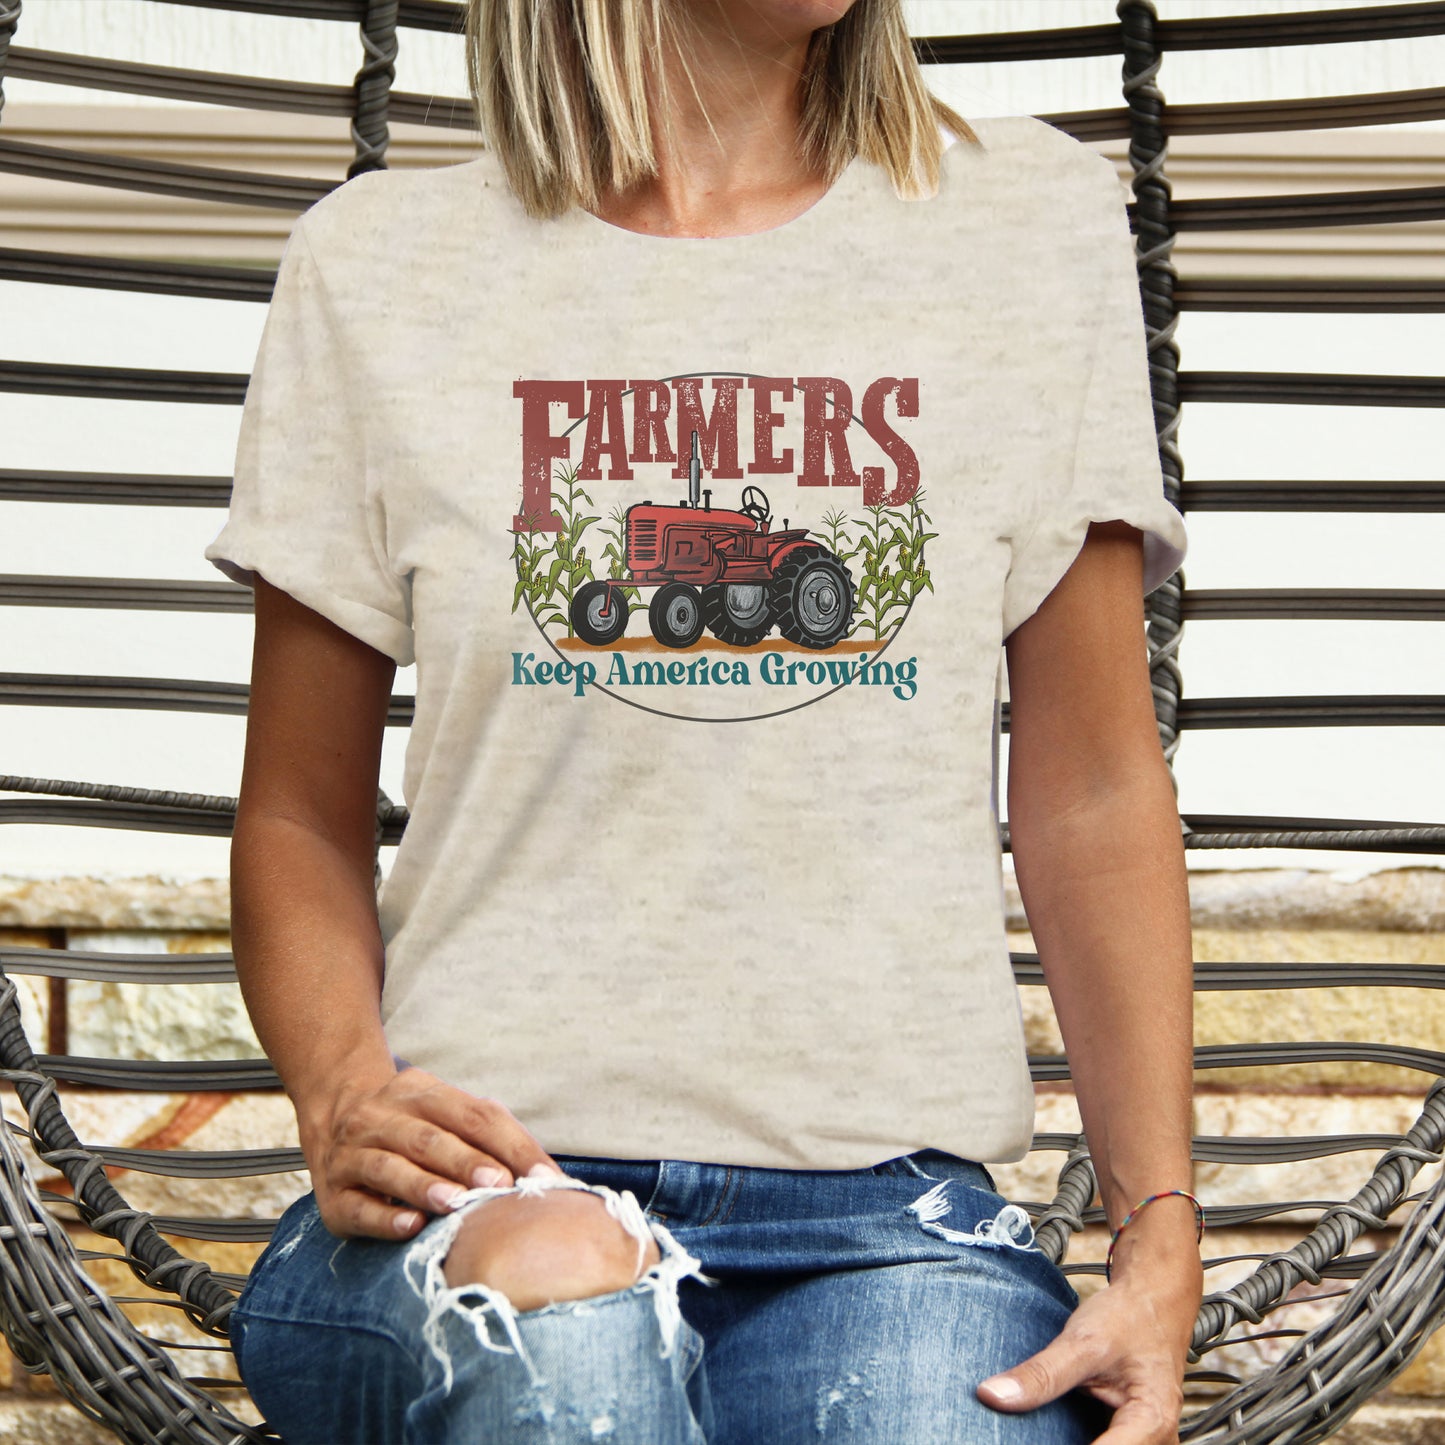 ADULT "Farmers Keep America Growing" Beige T-shirt with Red Tractor